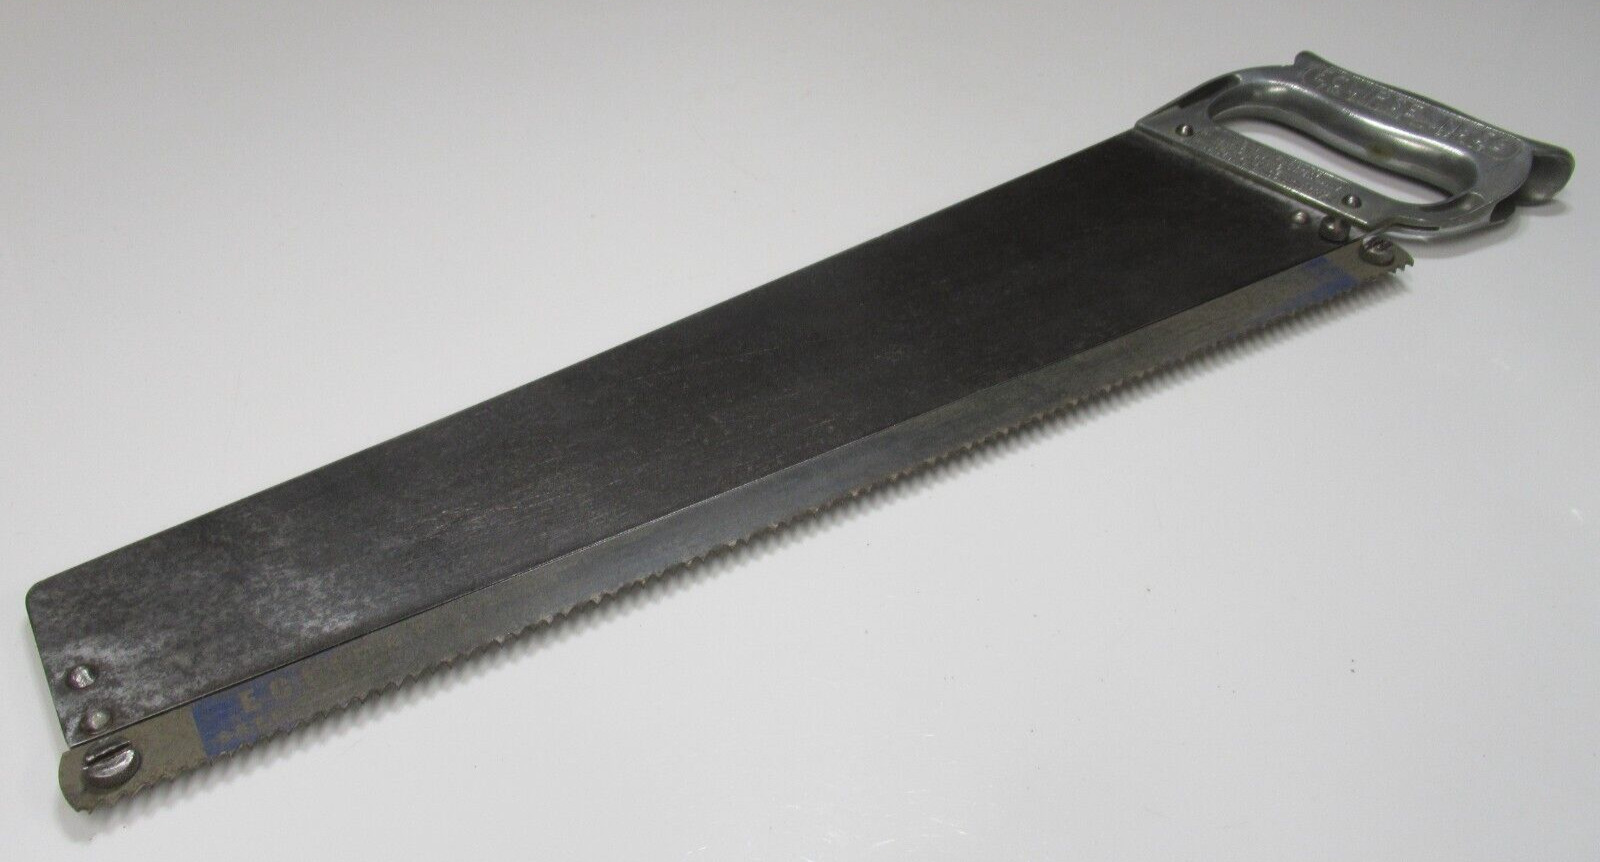 Stunning Vintage Eclipse No. 56 Saw For Building Materials With Eclipse Blade